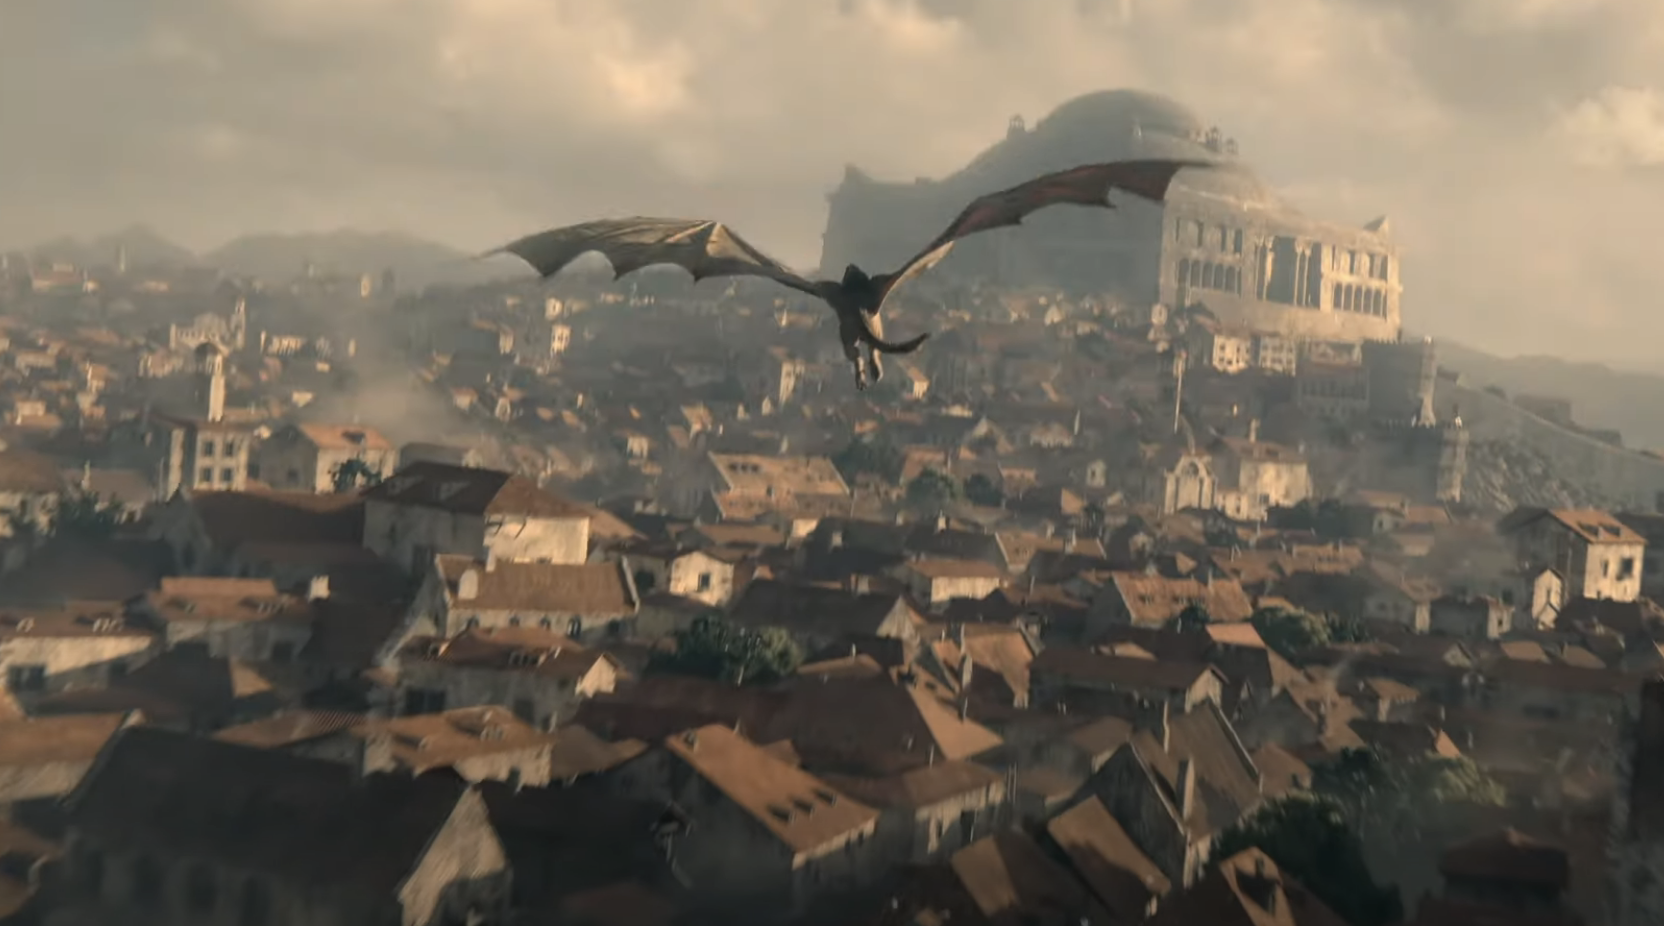 A dragon flies over a large, densely populated city